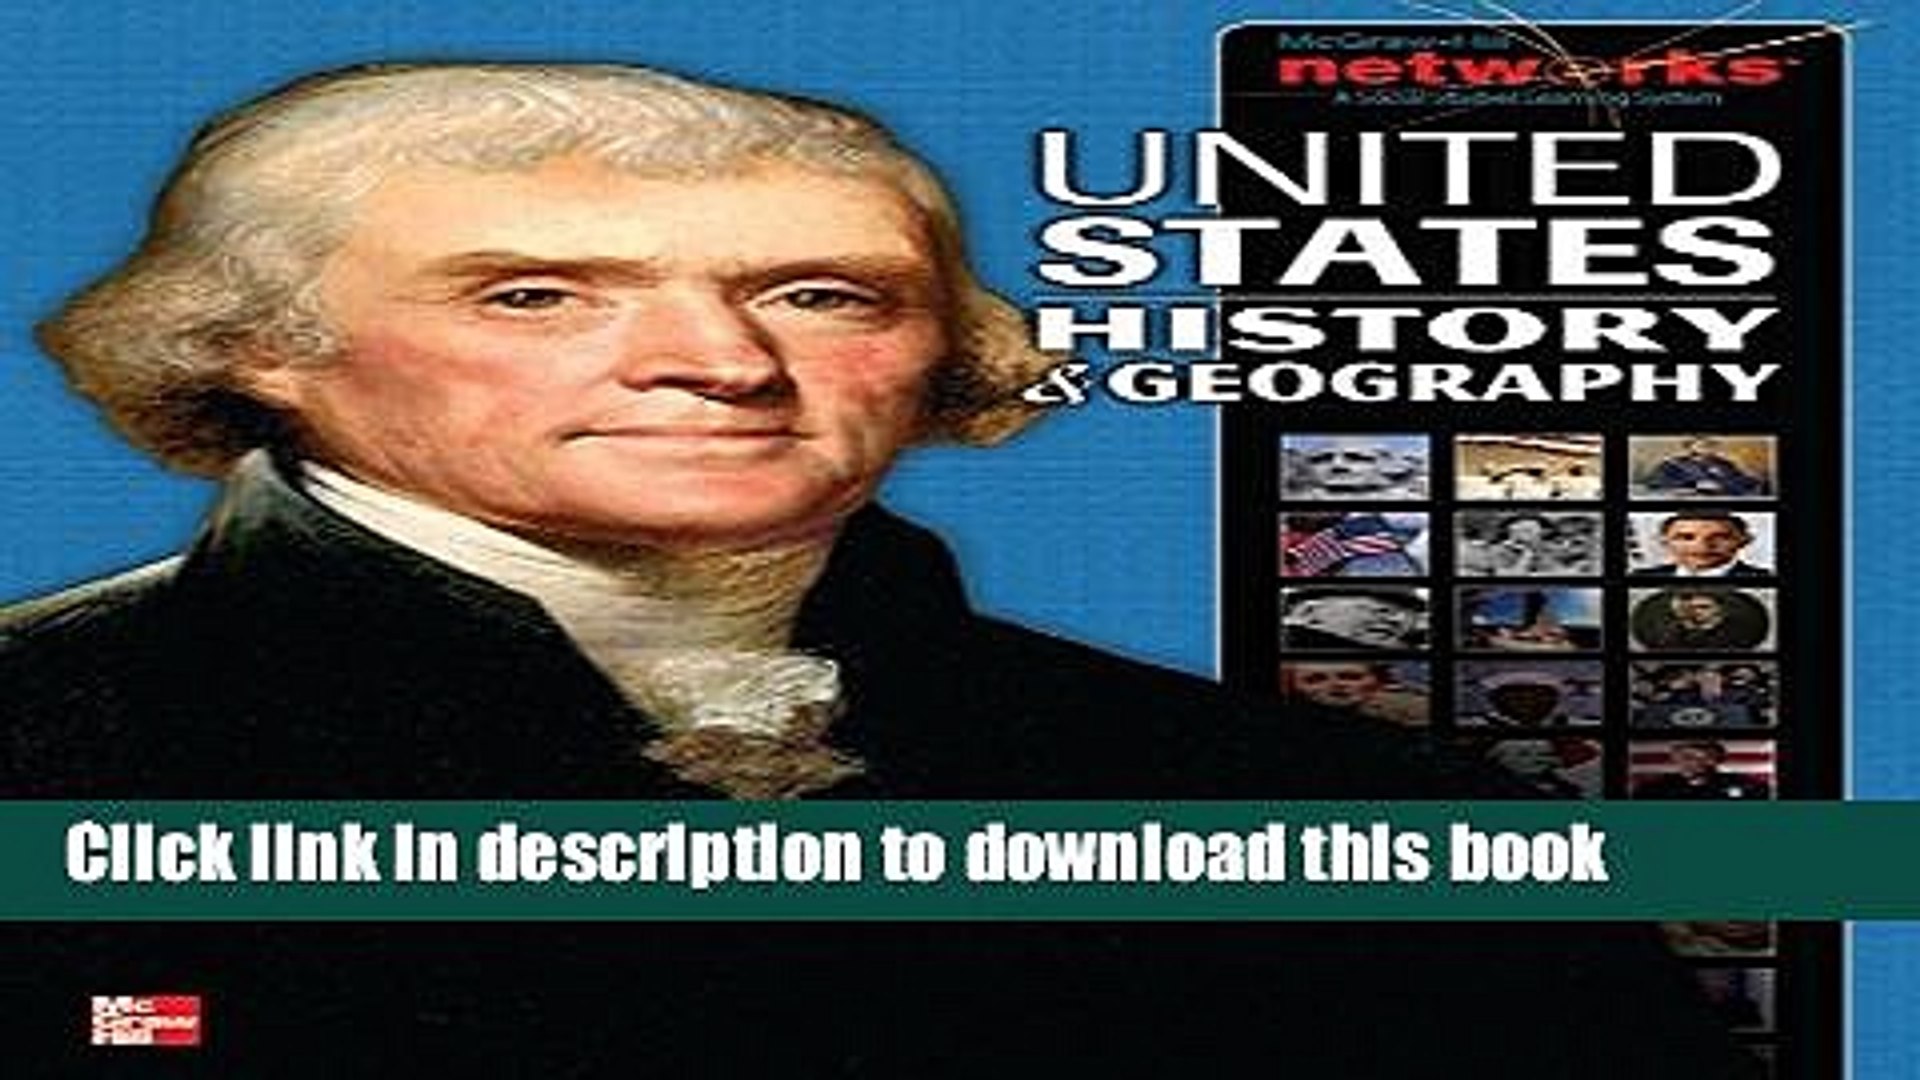 Looking for a comprehensive guide to United States history and geography? Look no further than the S